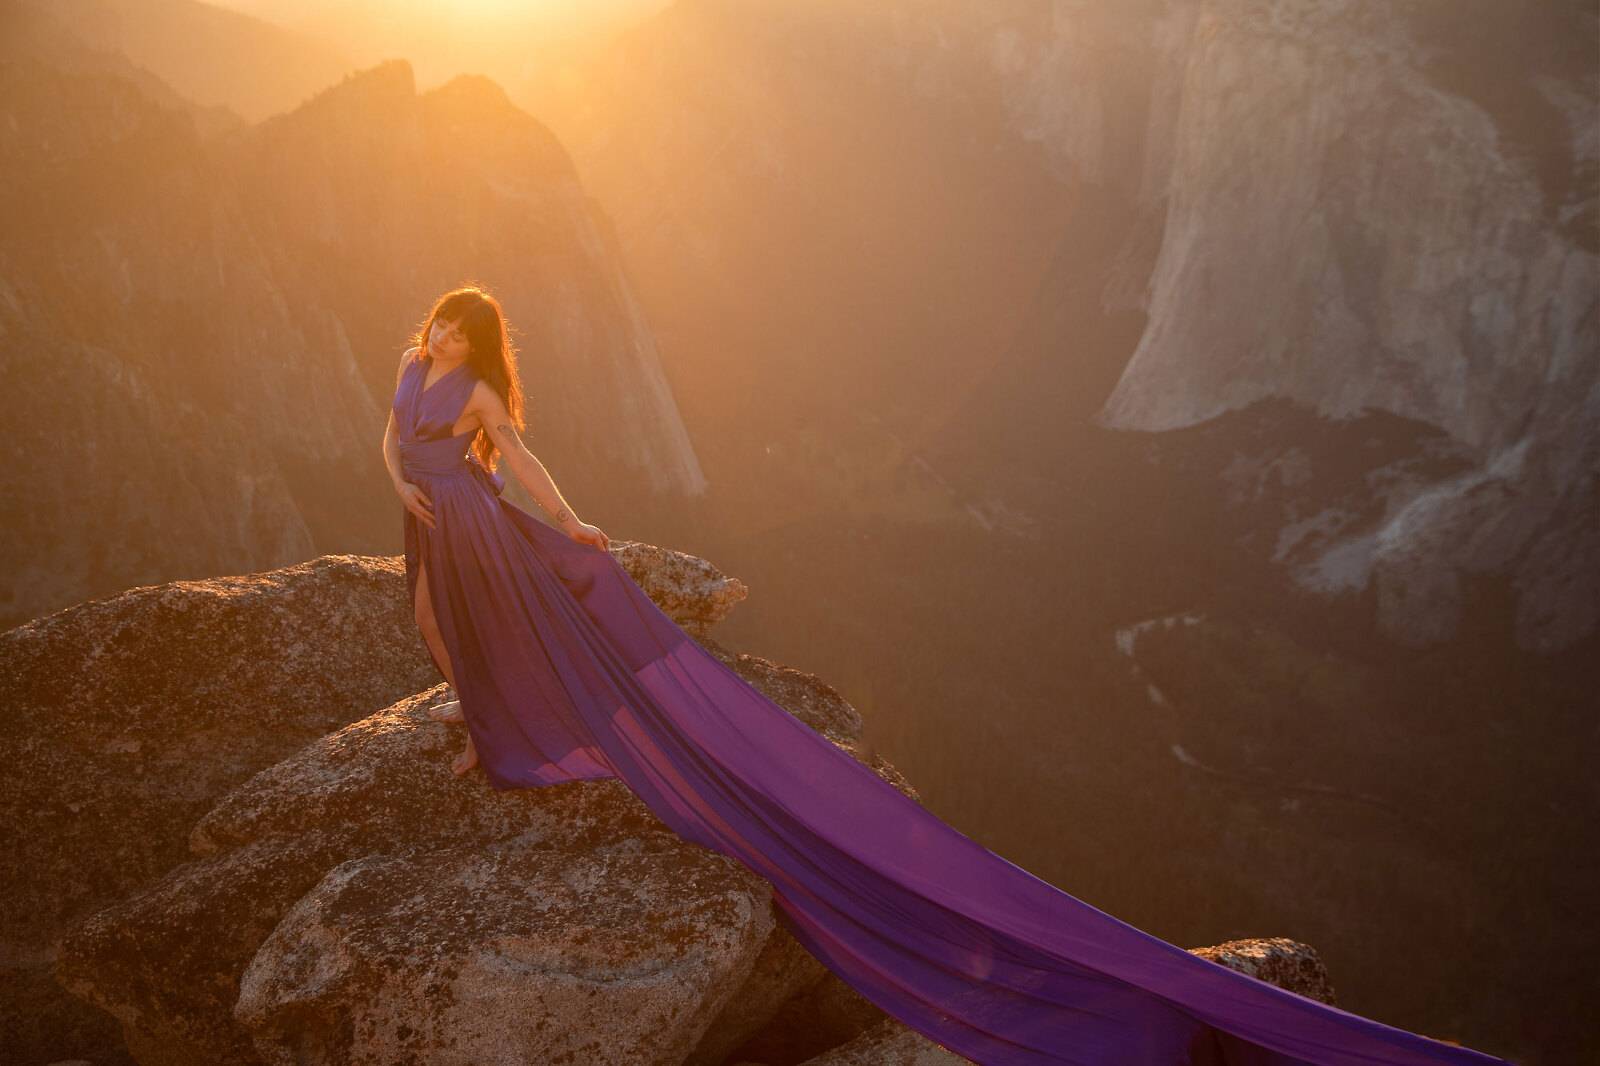 Woman at a viewpoint in a long, purple dress during sunset with mountains.